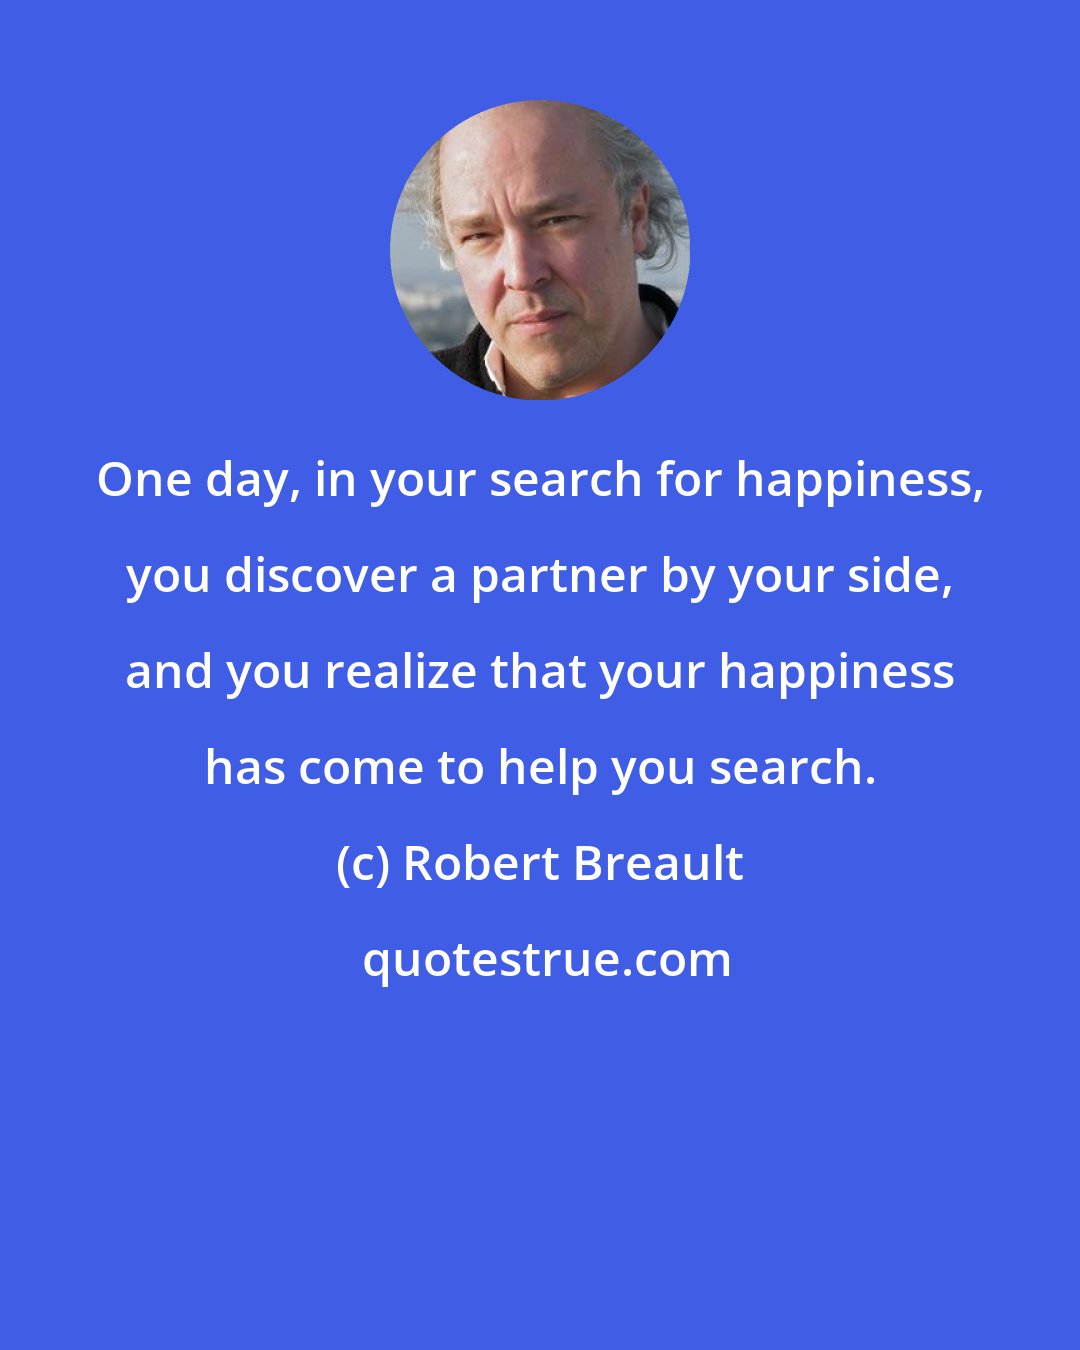 Robert Breault: One day, in your search for happiness, you discover a partner by your side, and you realize that your happiness has come to help you search.